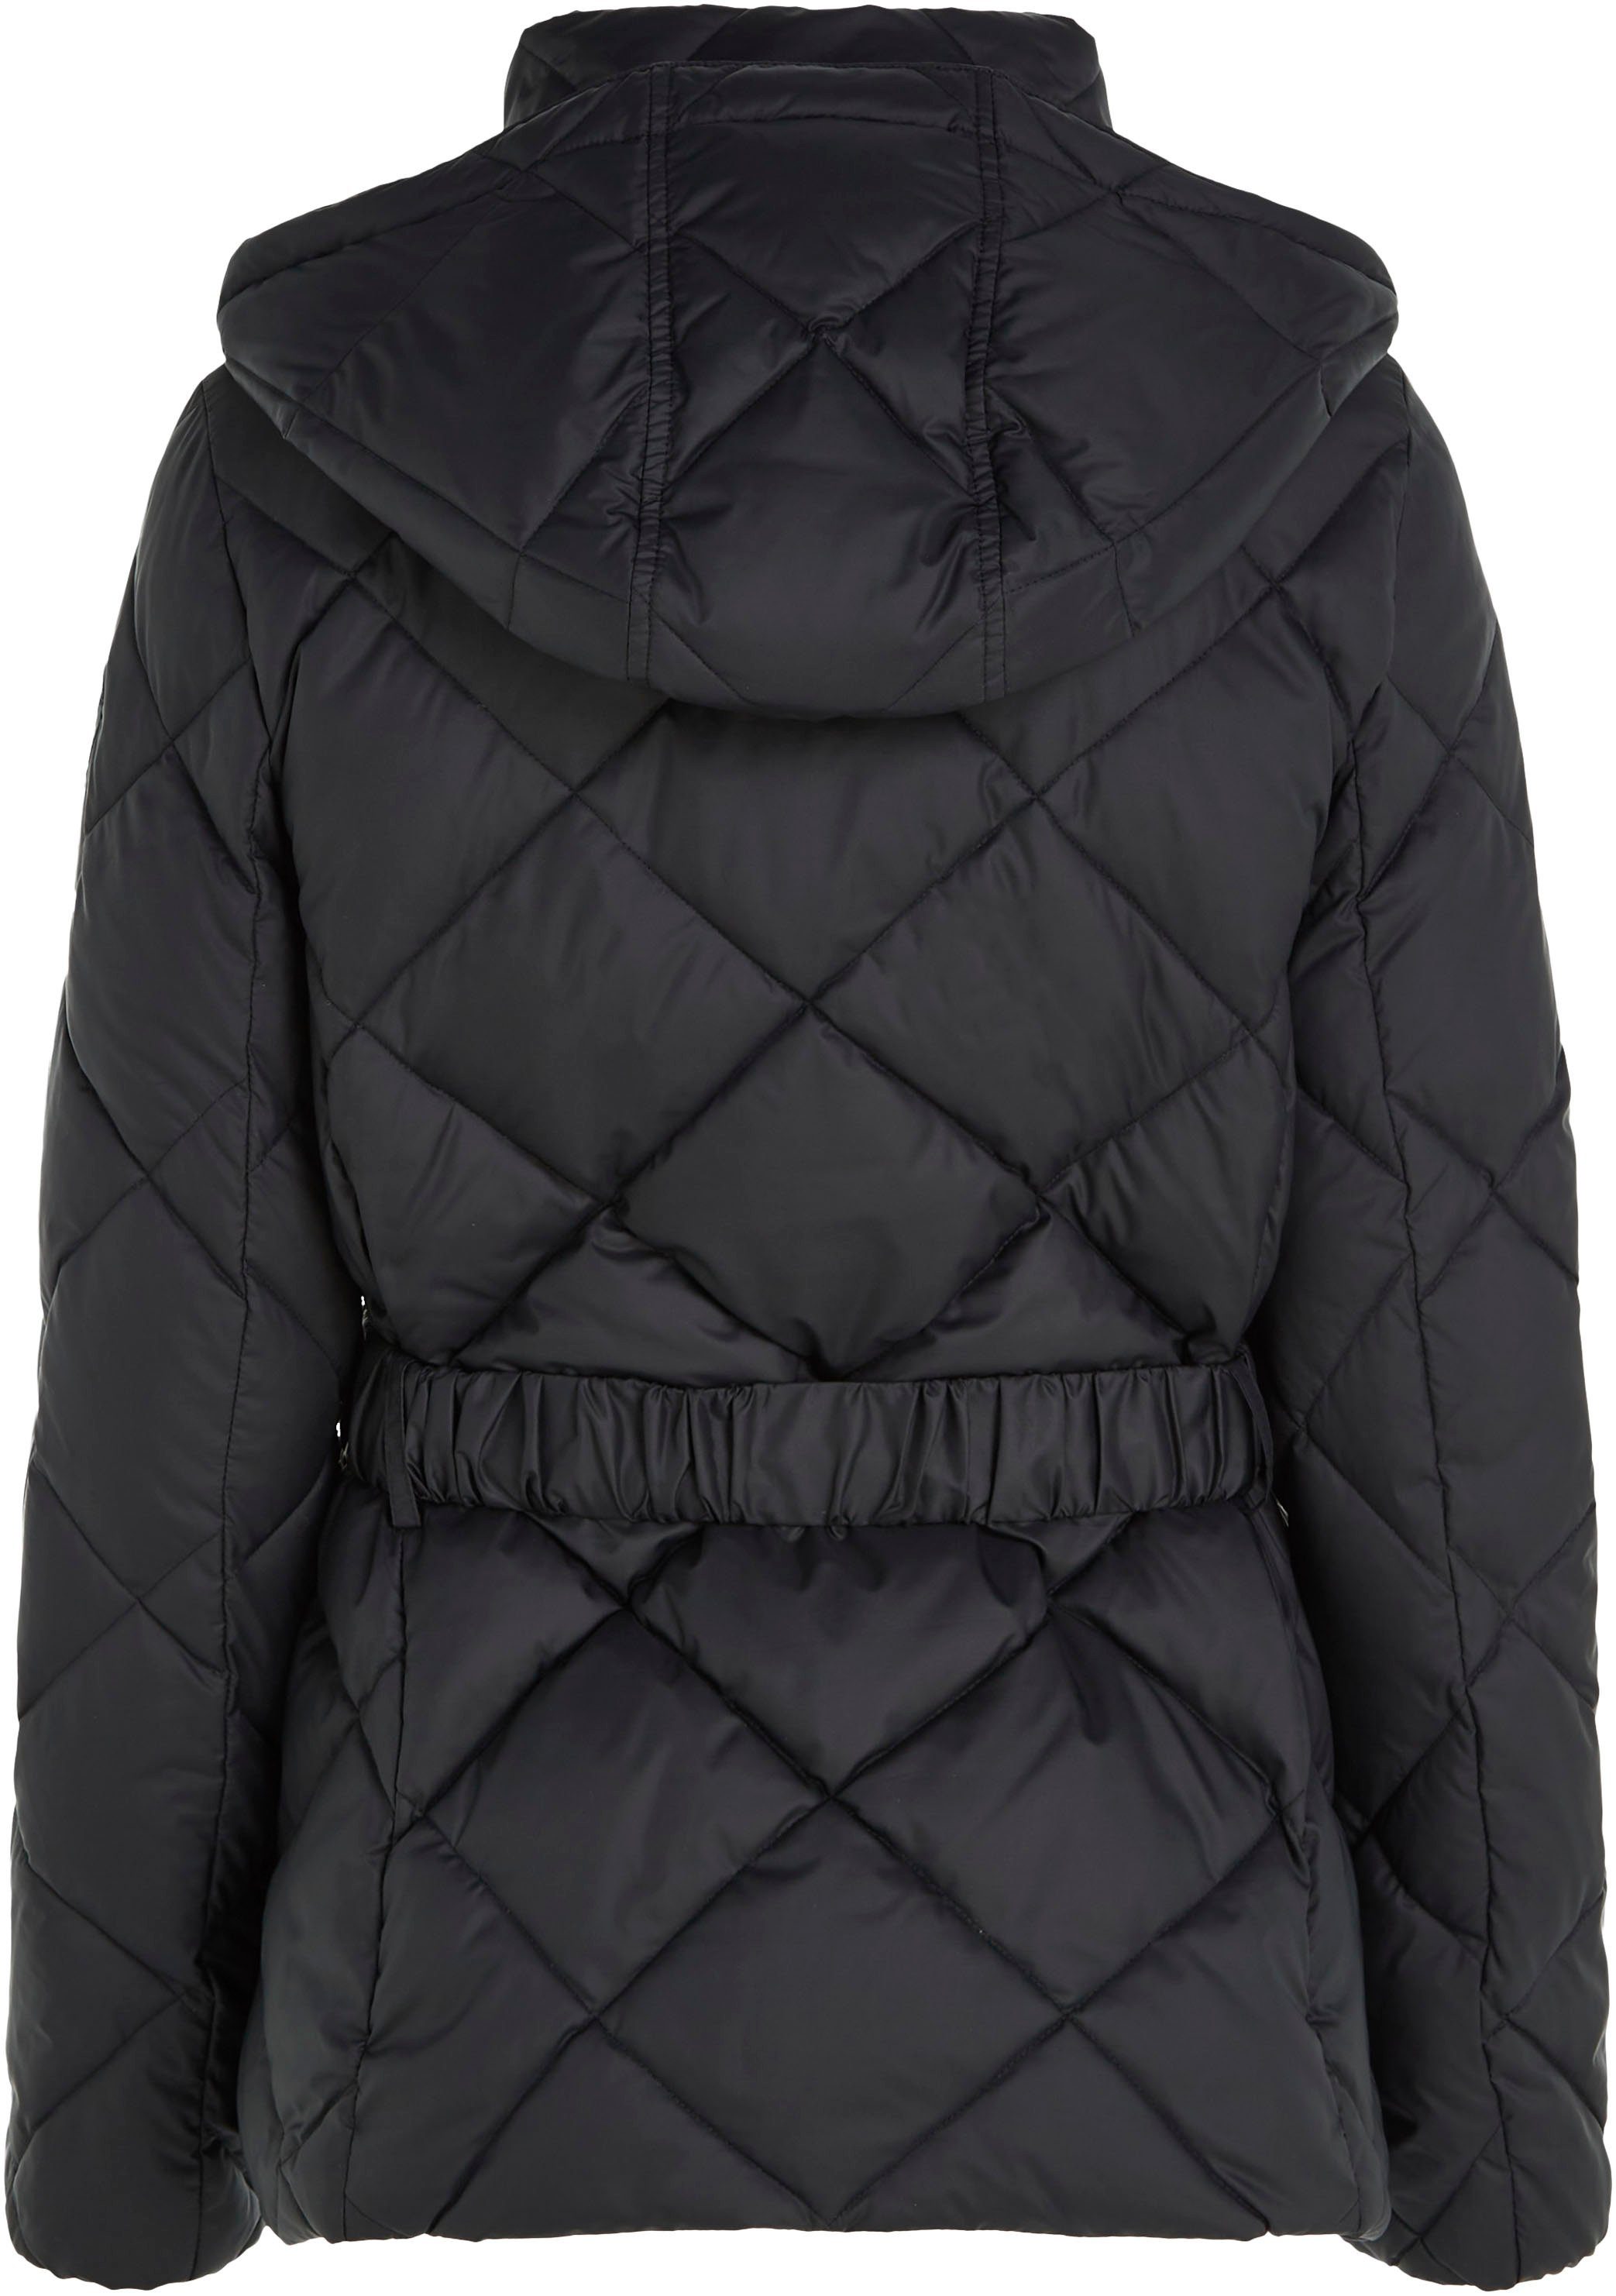 JACKET Logostickerei ELEVATED QUILTED Steppjacke Tommy mit Hilfiger BELTED